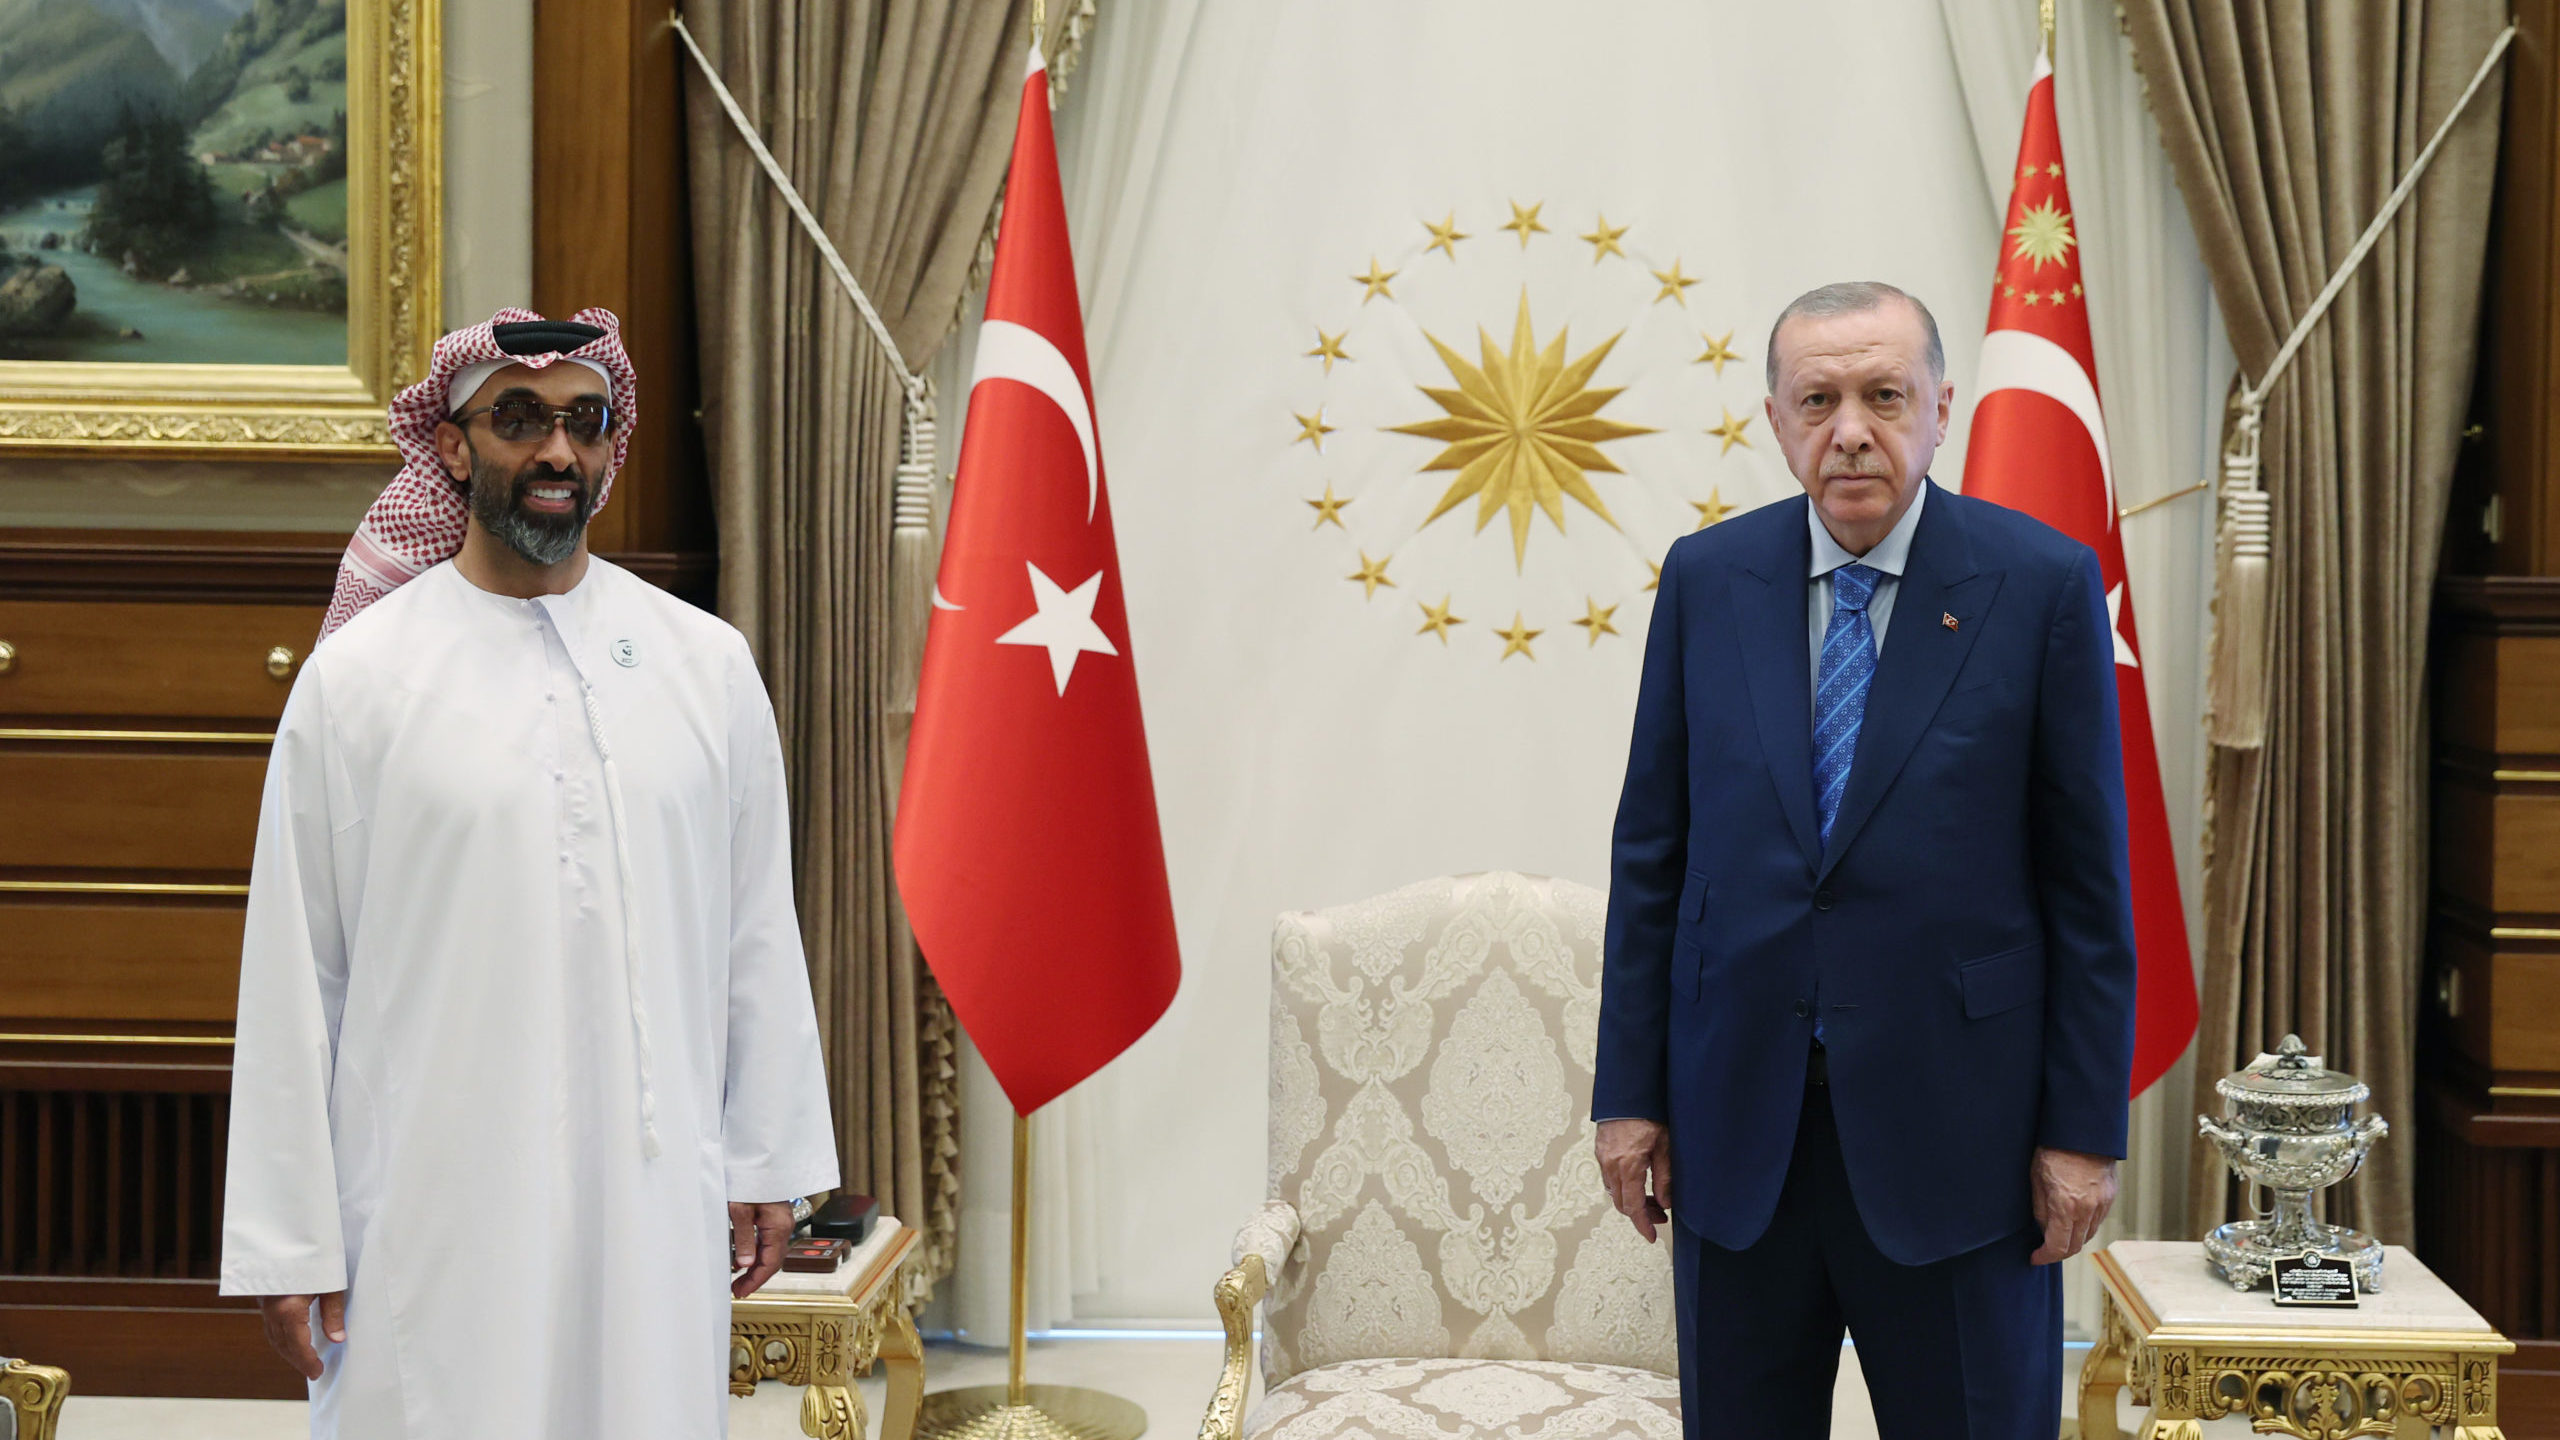 Warming Ties Between Turkey and Gulf States Are Sign of Changing Geopolitical Landscape